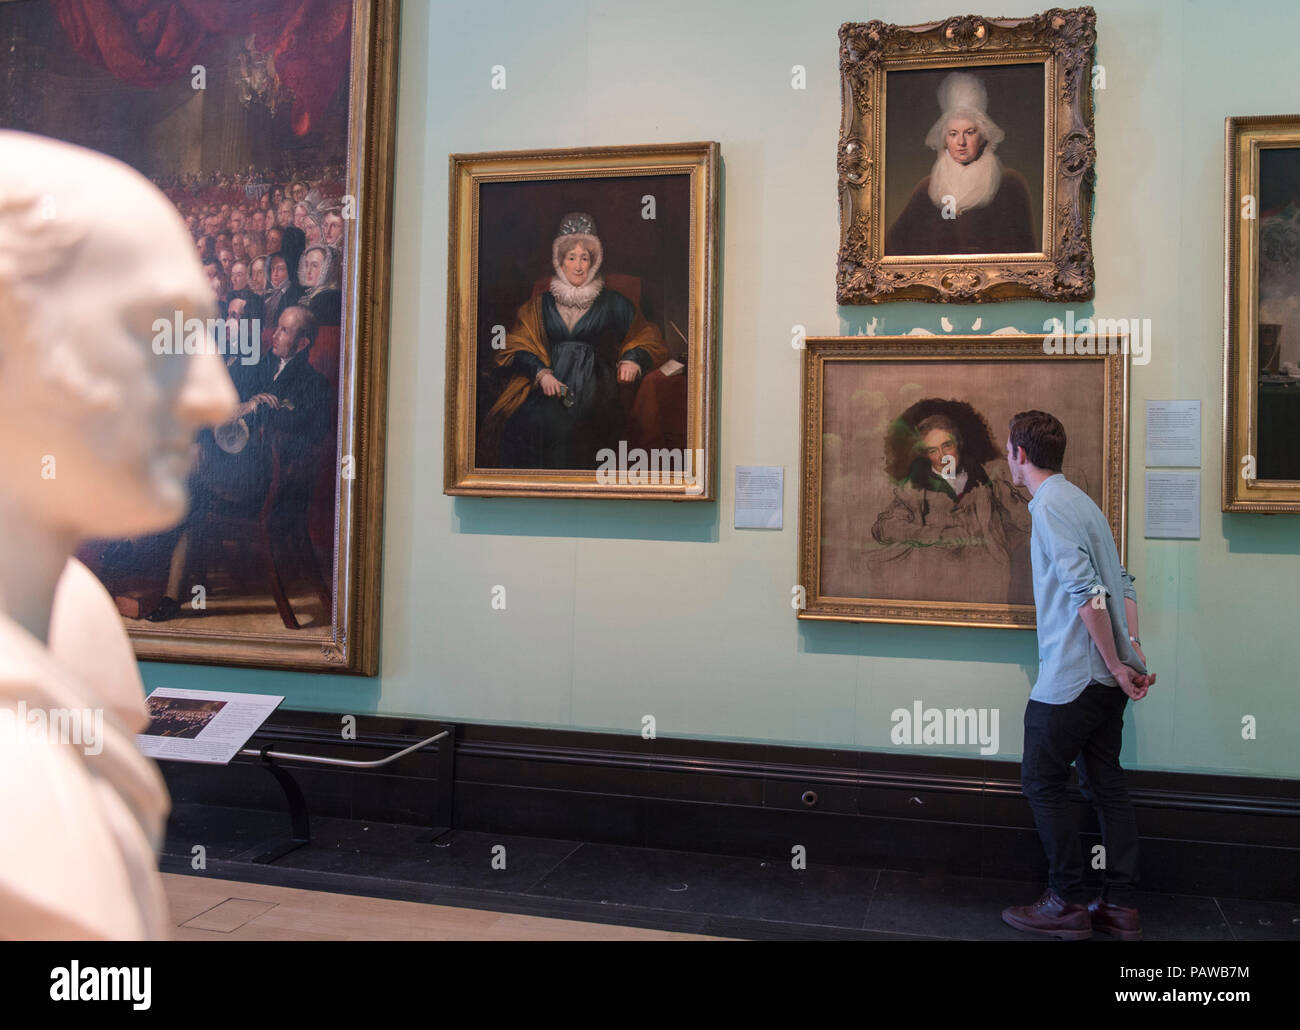 National Portrait Gallery, London, UK. 25 July, 2018. A member of Gallery staff views Sir Thomas Lawrence’s famous portrait of William Wilberforce, which will travel to Hull, the place of his birth, for the first time as part of ‘Coming Home’. Lawrence’s unfinished portrait of Wilberforce, was one of the first works acquired by the National Portrait Gallery when it was established in 1856. The work will go on display in the Ferens Art Gallery in Hull in 2019. Credit: Malcolm Park/Alamy Live News. Stock Photo